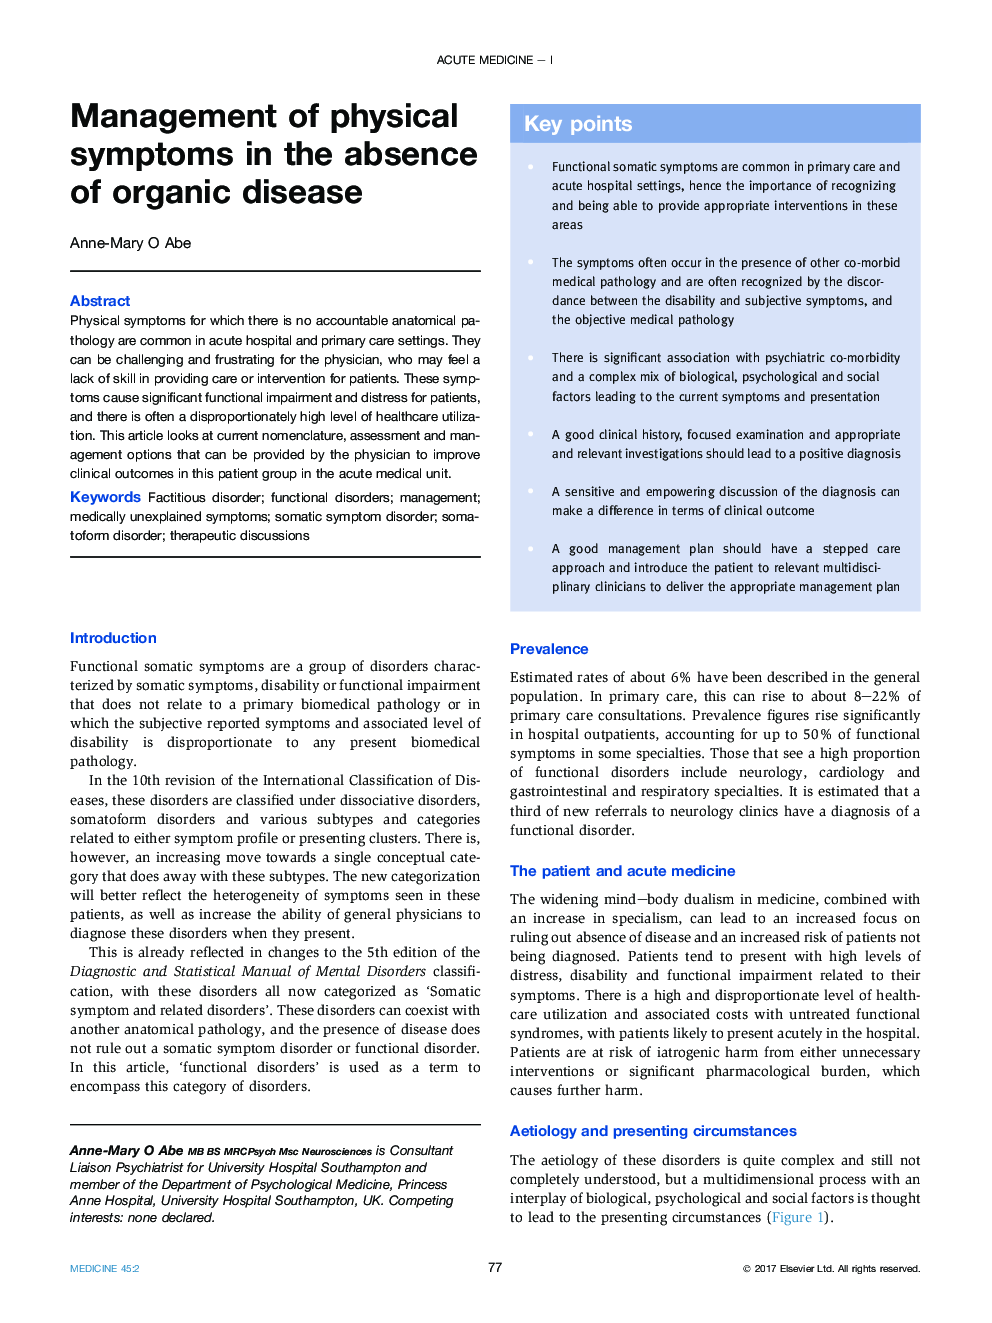 Management of physical symptoms in the absence of organic disease